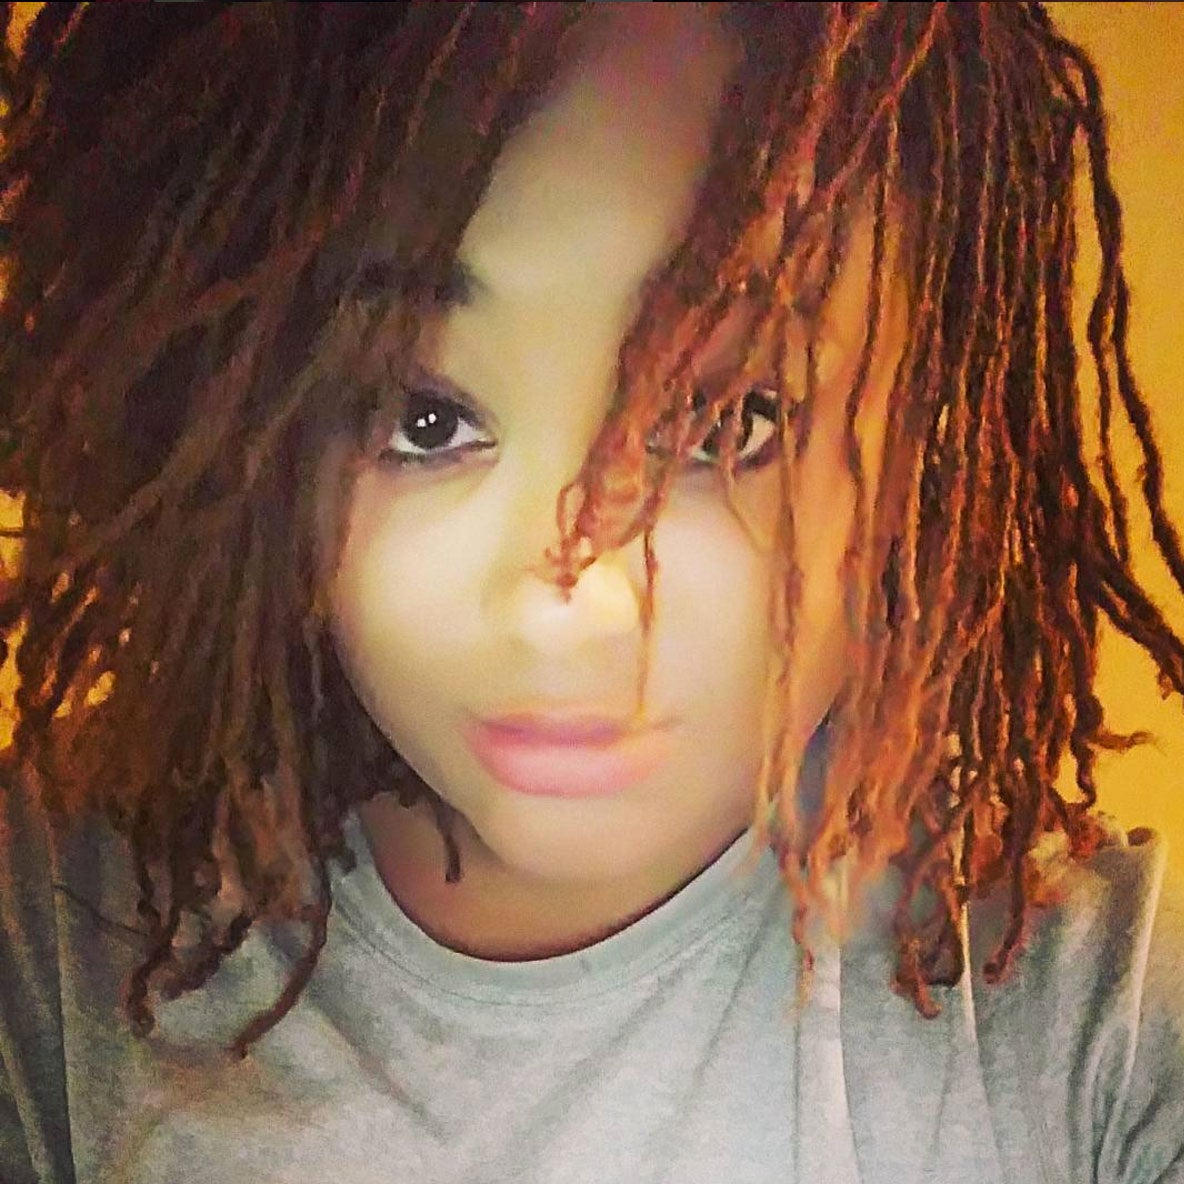 30 Black Women With Seriously Stunning Sister Locs
